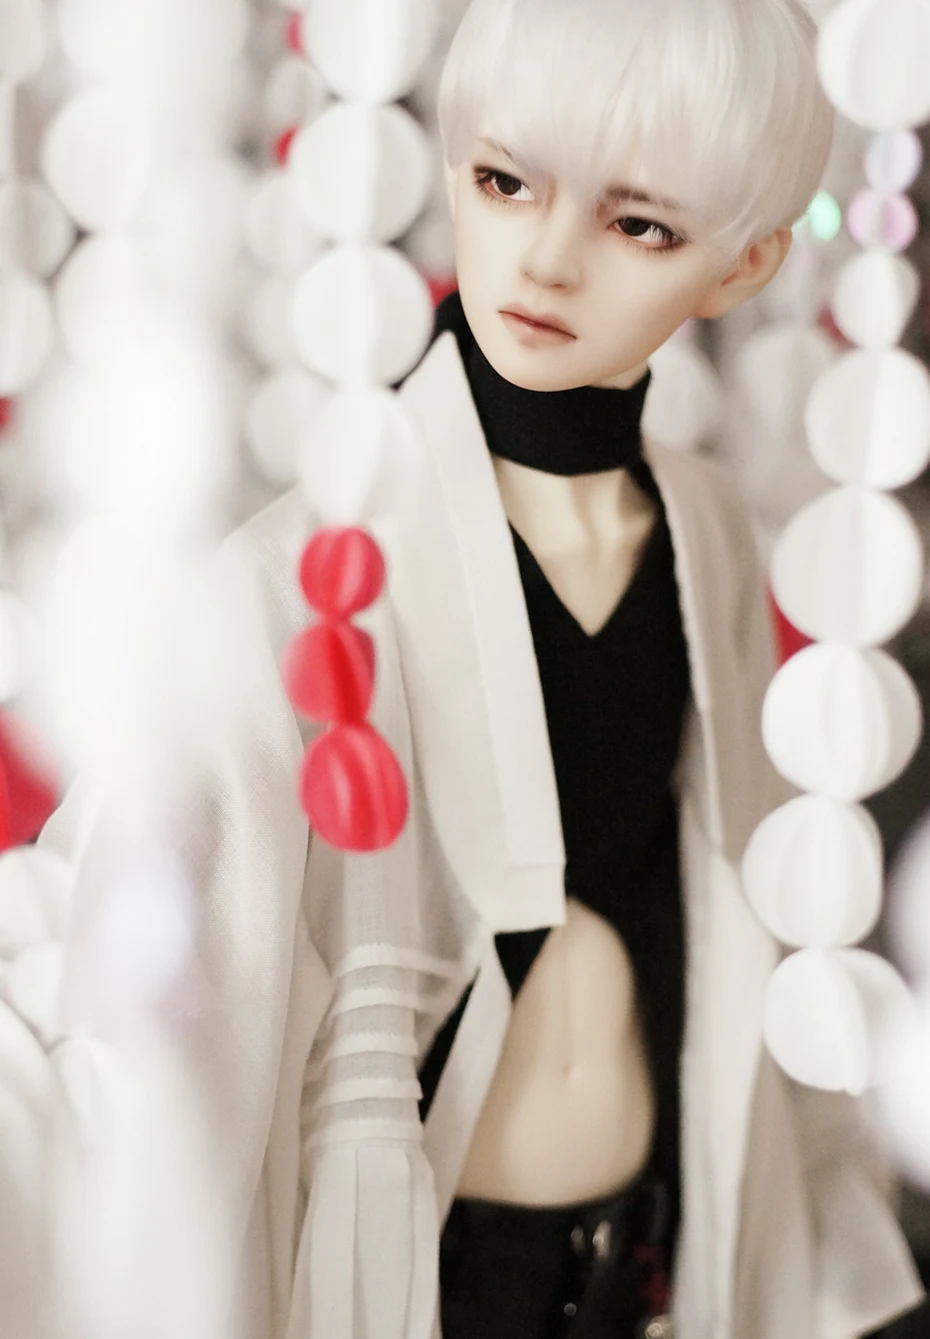 

New Hwayoung huayong 3 points bjd sd doll handsome makeup doll 65cm muscle man